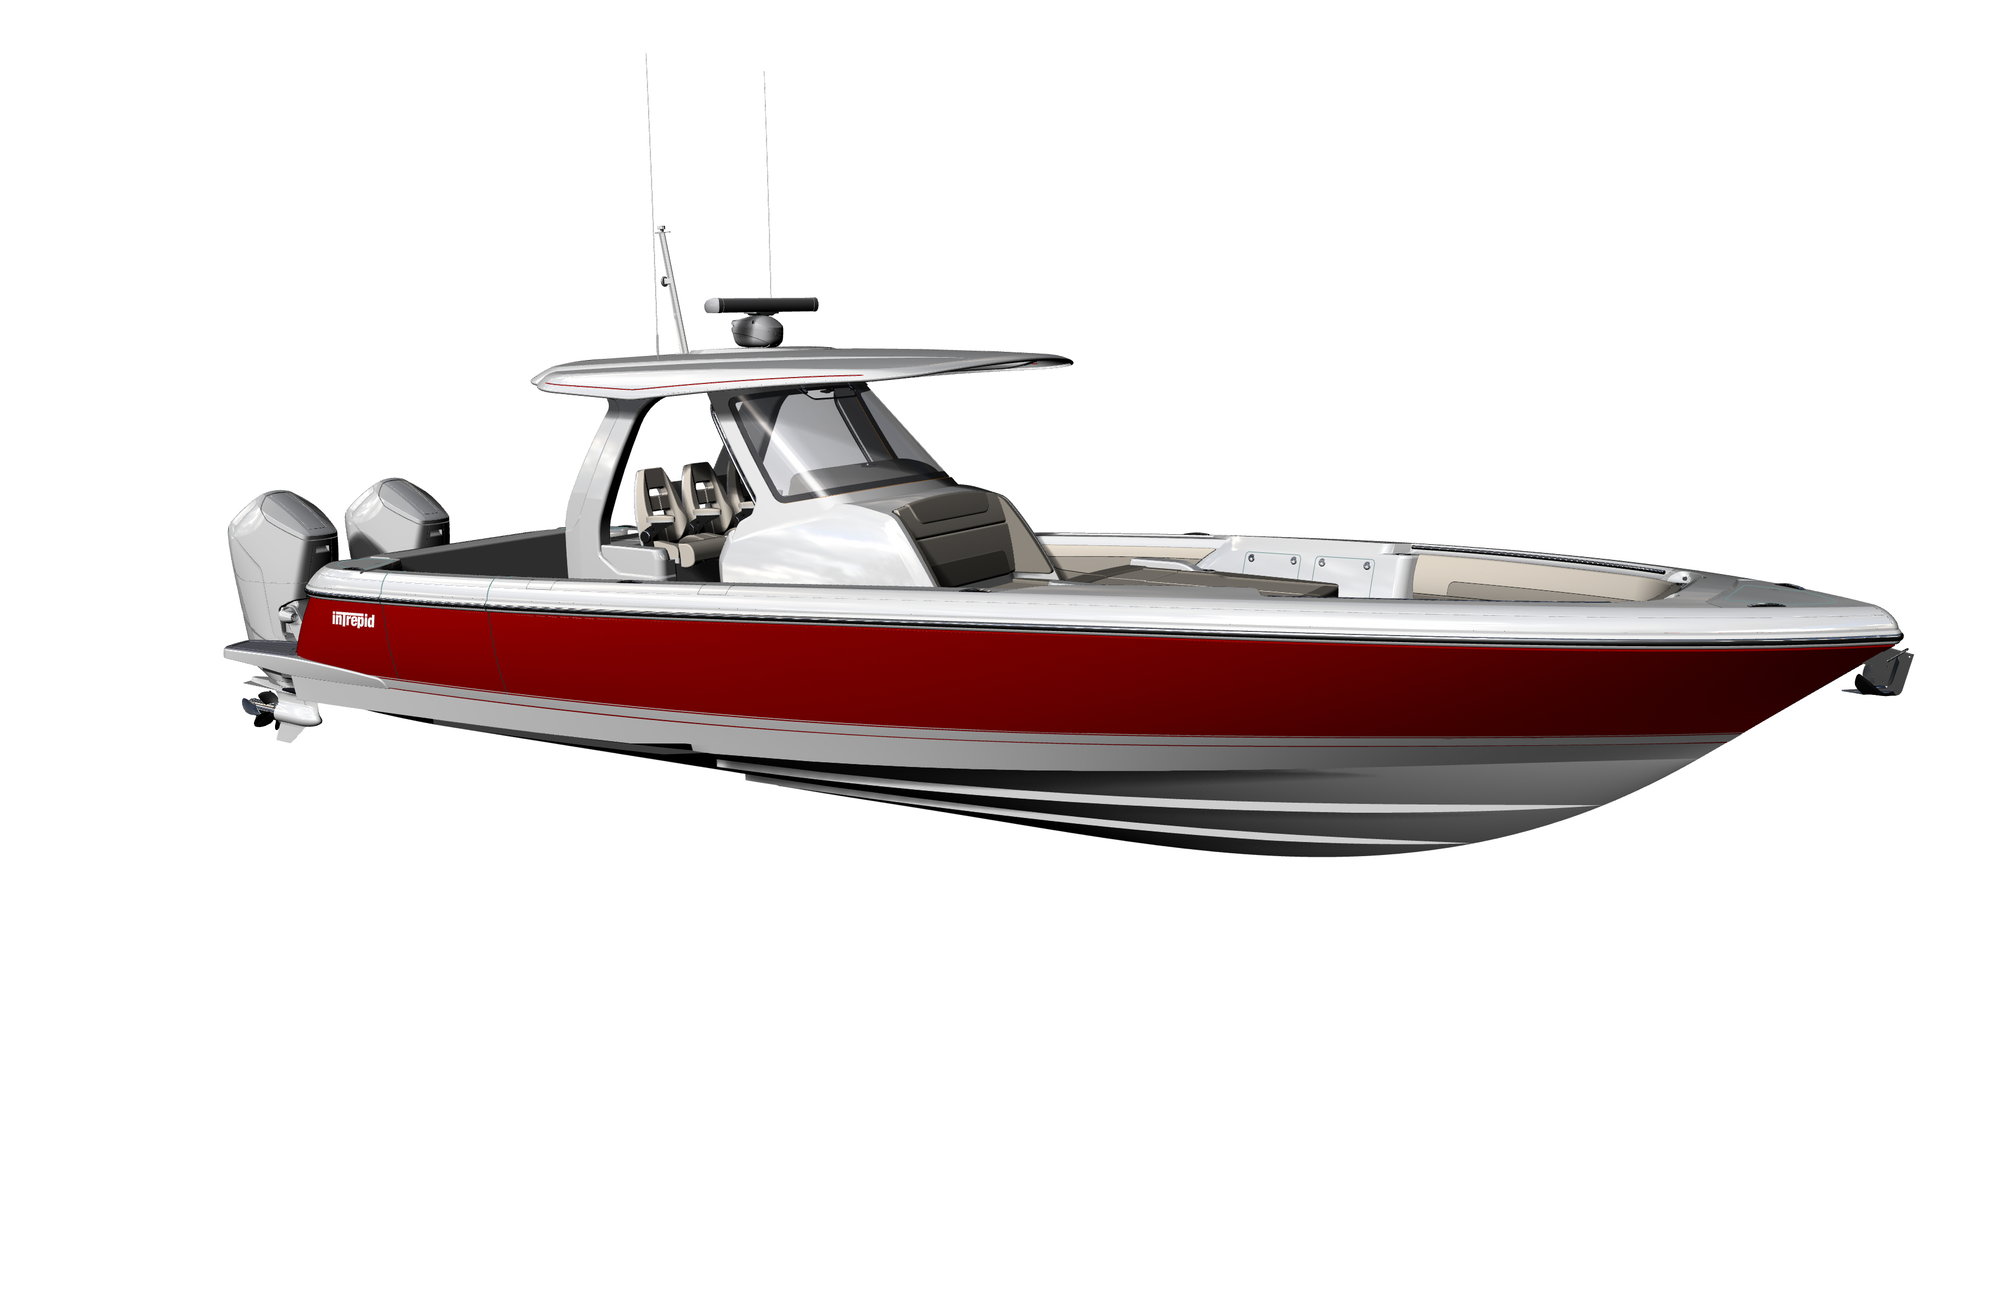 Zeebaas Zx27 The Hull Truth Boating And Fishing Forum, 42% OFF